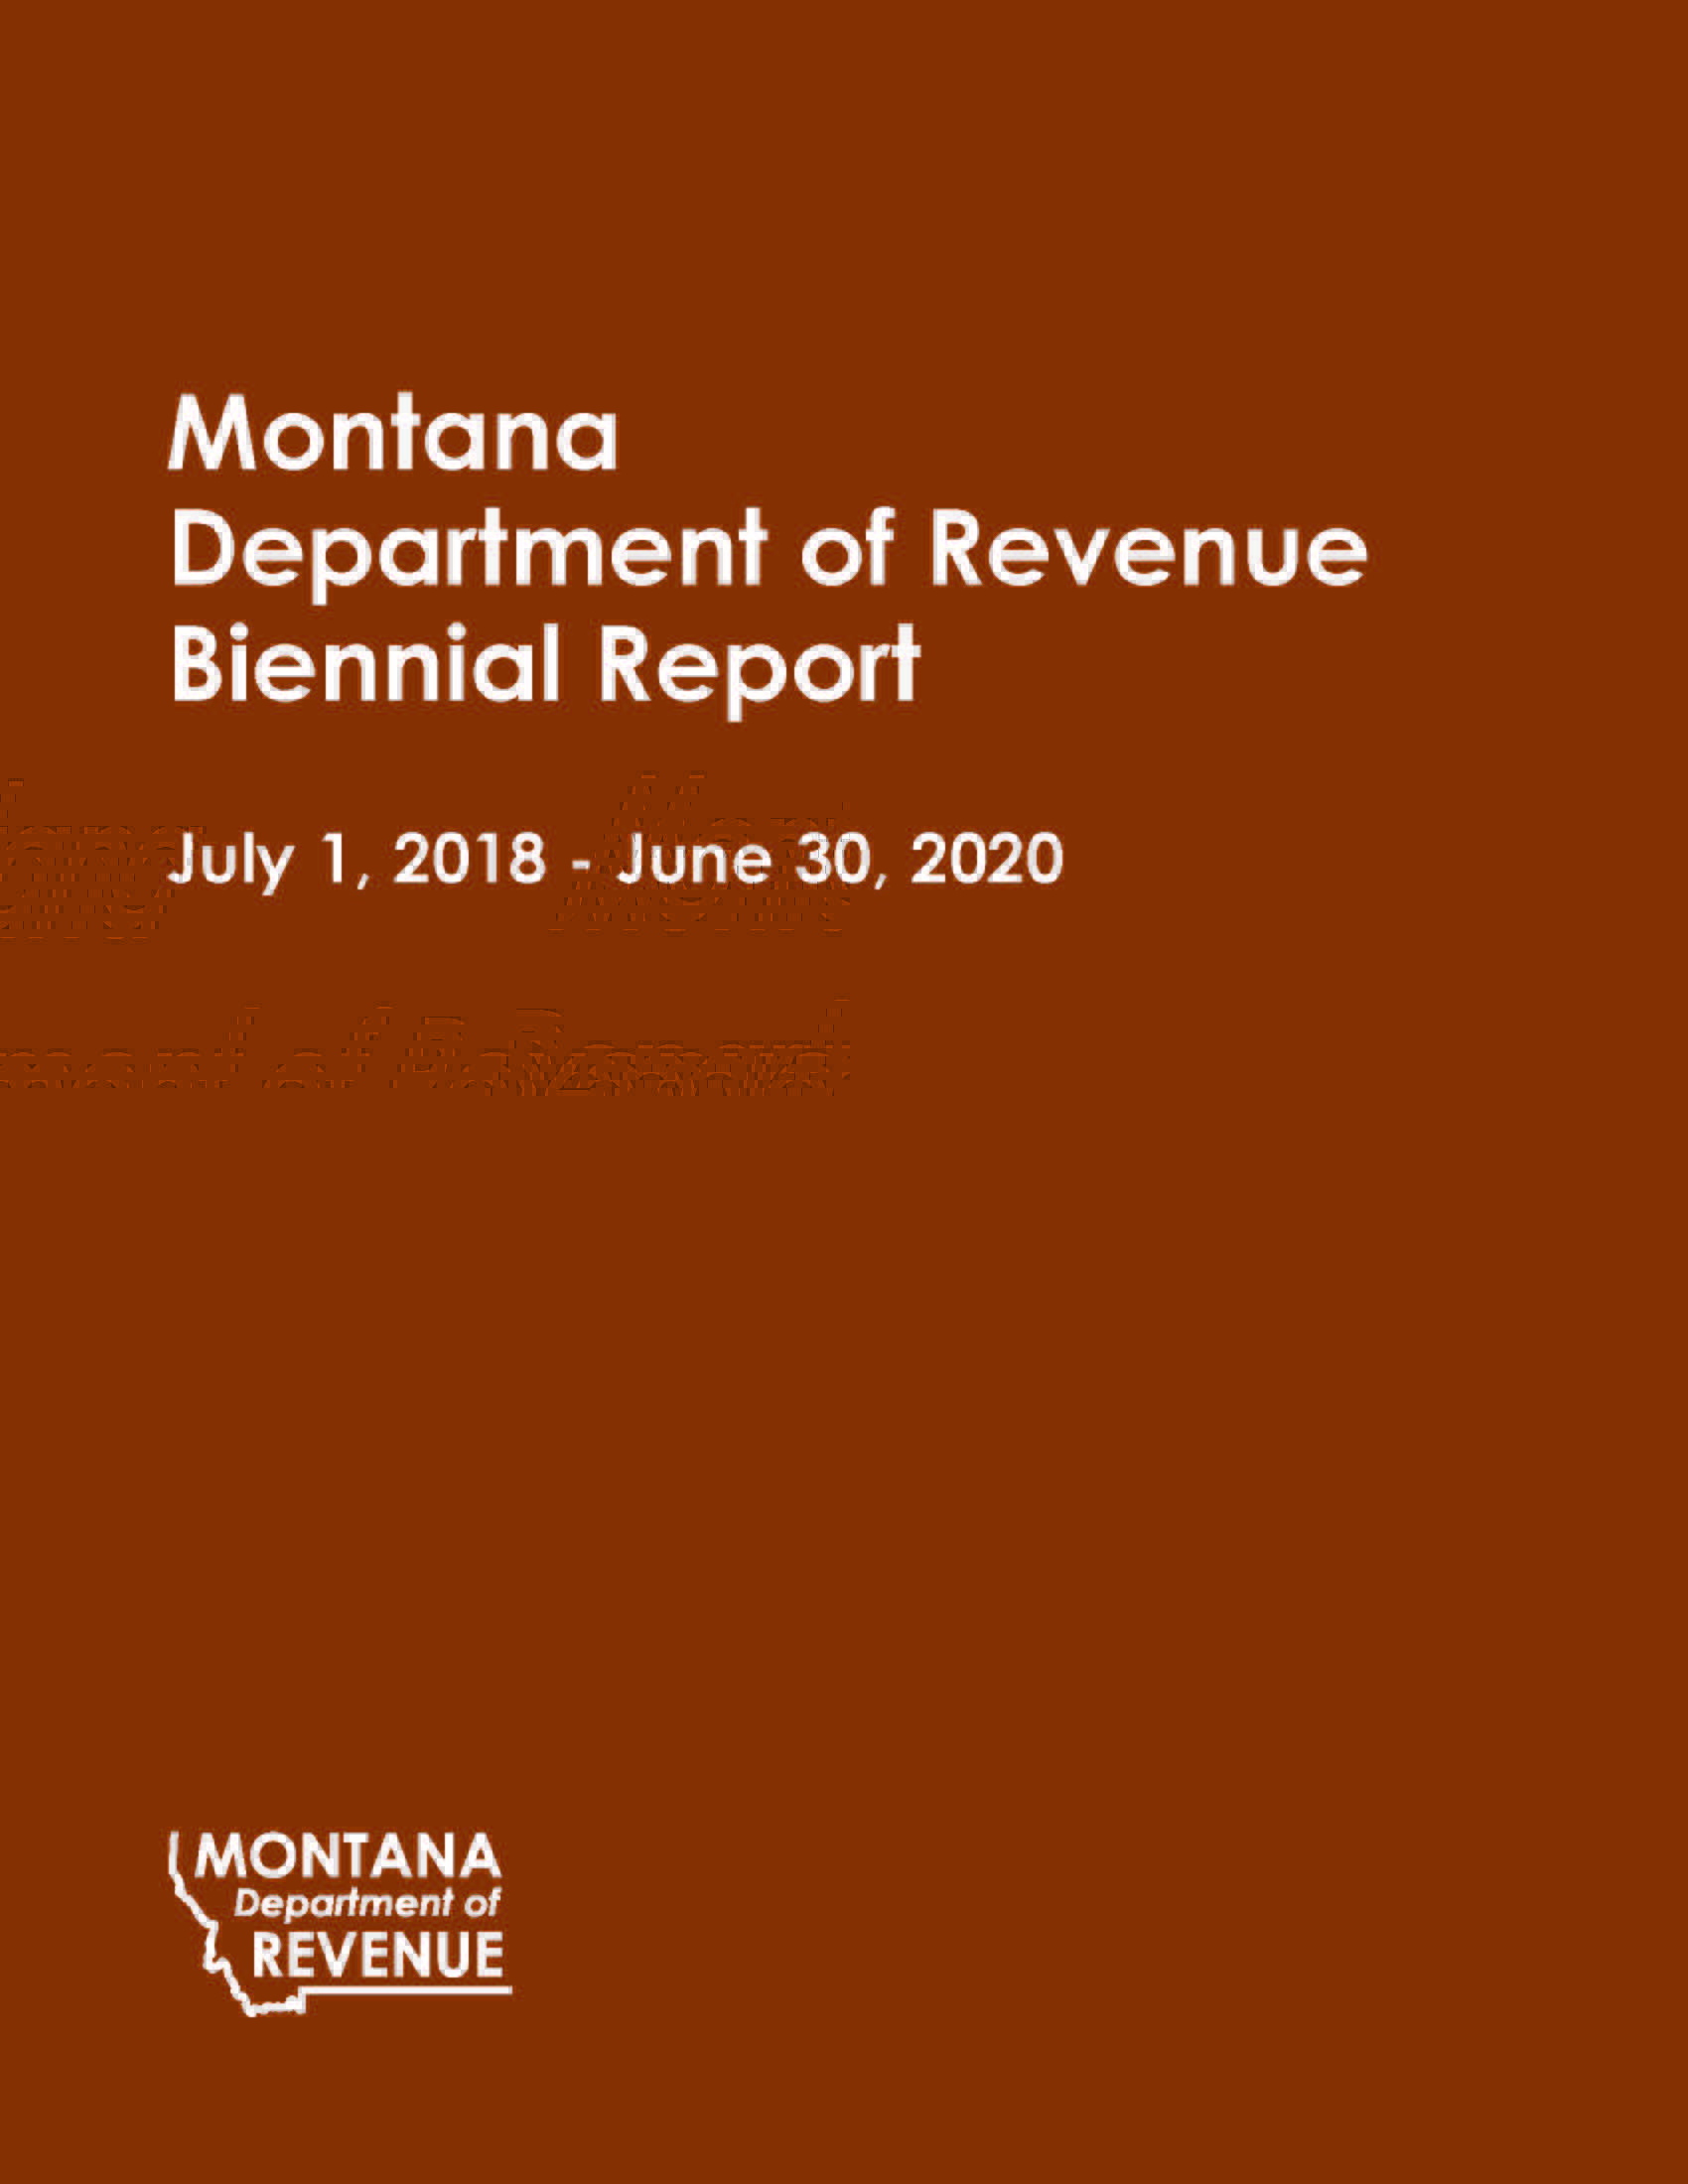 Montana Department of Revenue Biennial Report - July 1, 2018 through July 30, 2020 - Cover Image Only